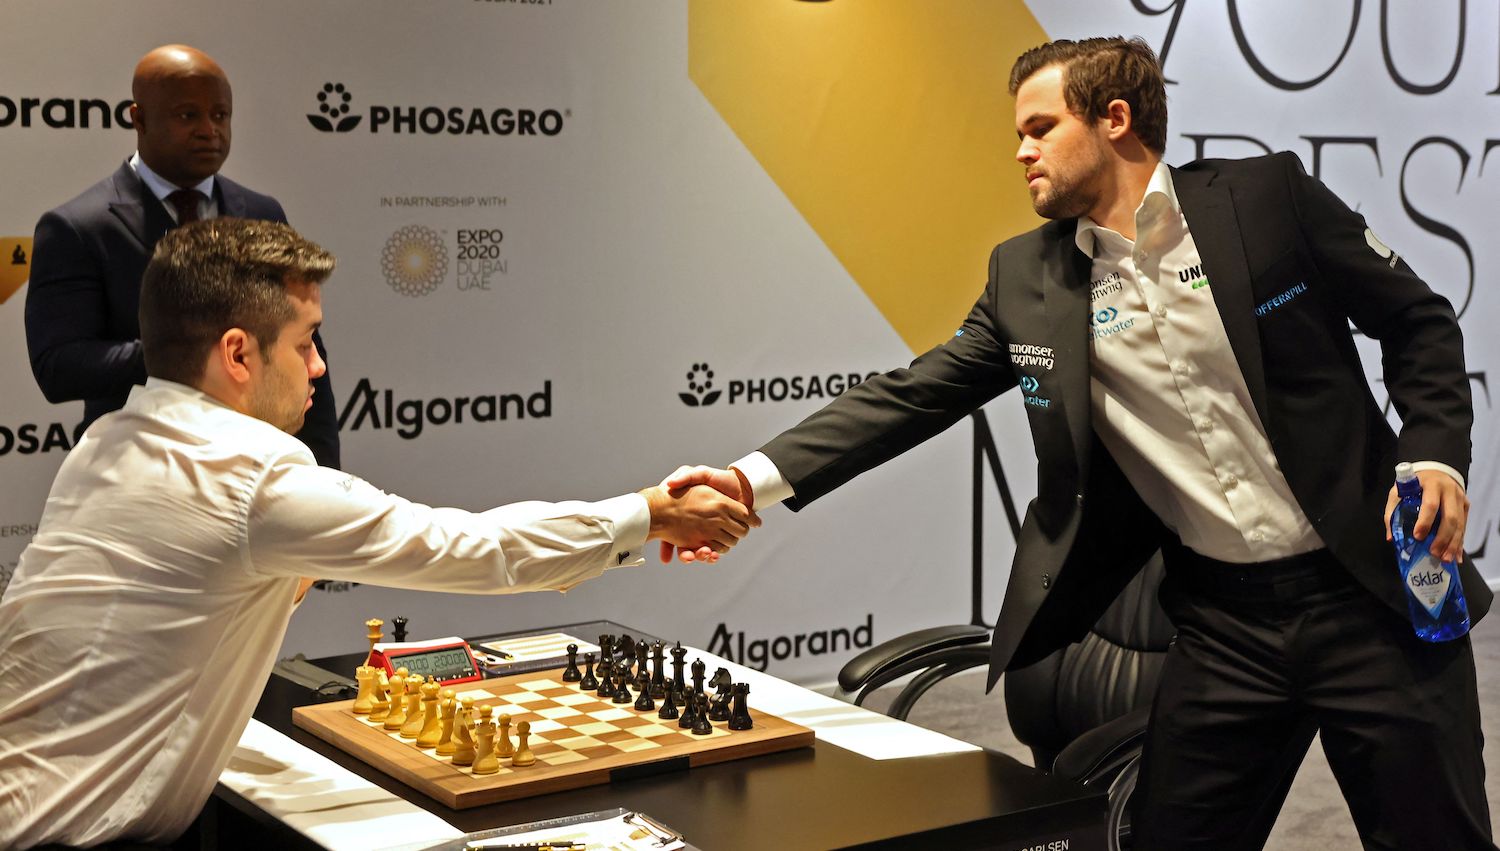 World championship Ian Nepomniachtchi vs Magnus Carlsen game 9 - a killing blow to Nepomniachtchi’s hopes